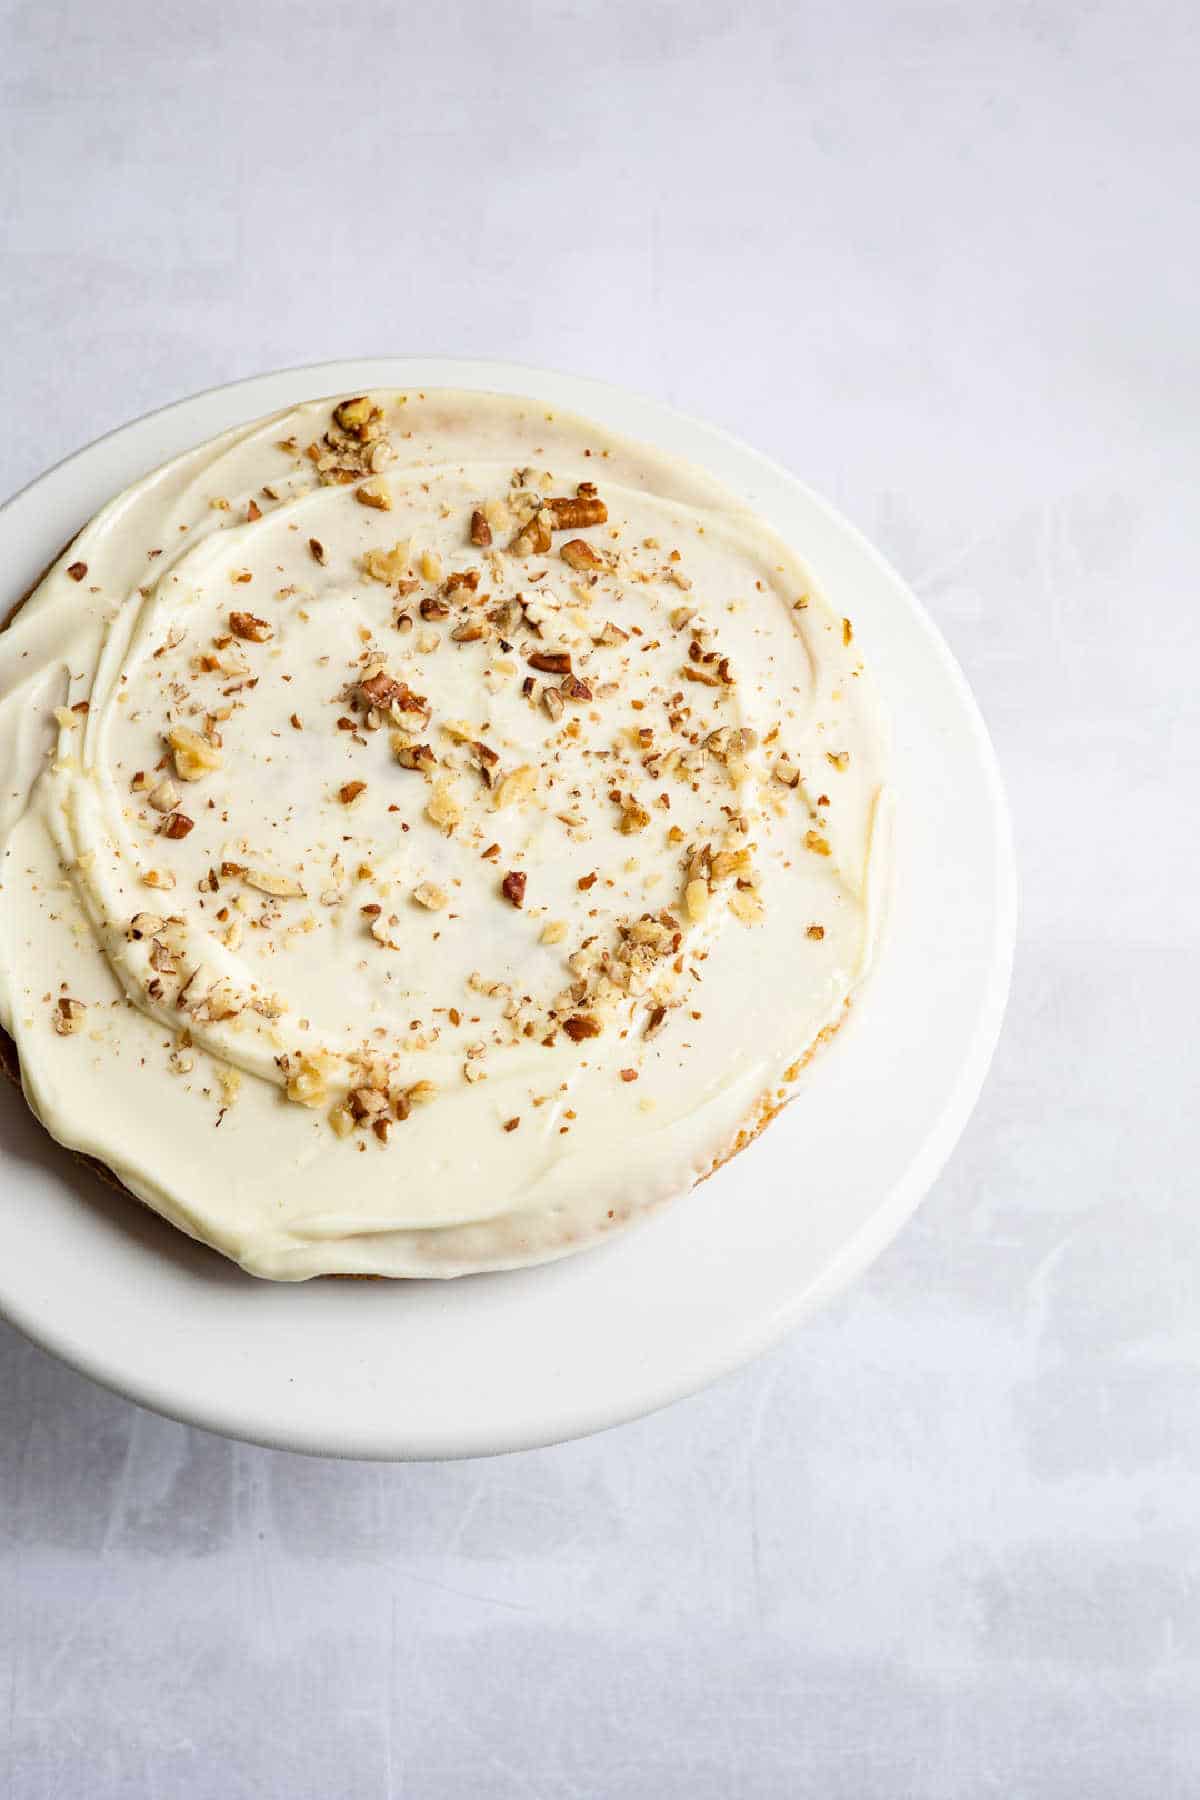 Top down photo of an Italian cream cake with pecans sprinkled on top. 